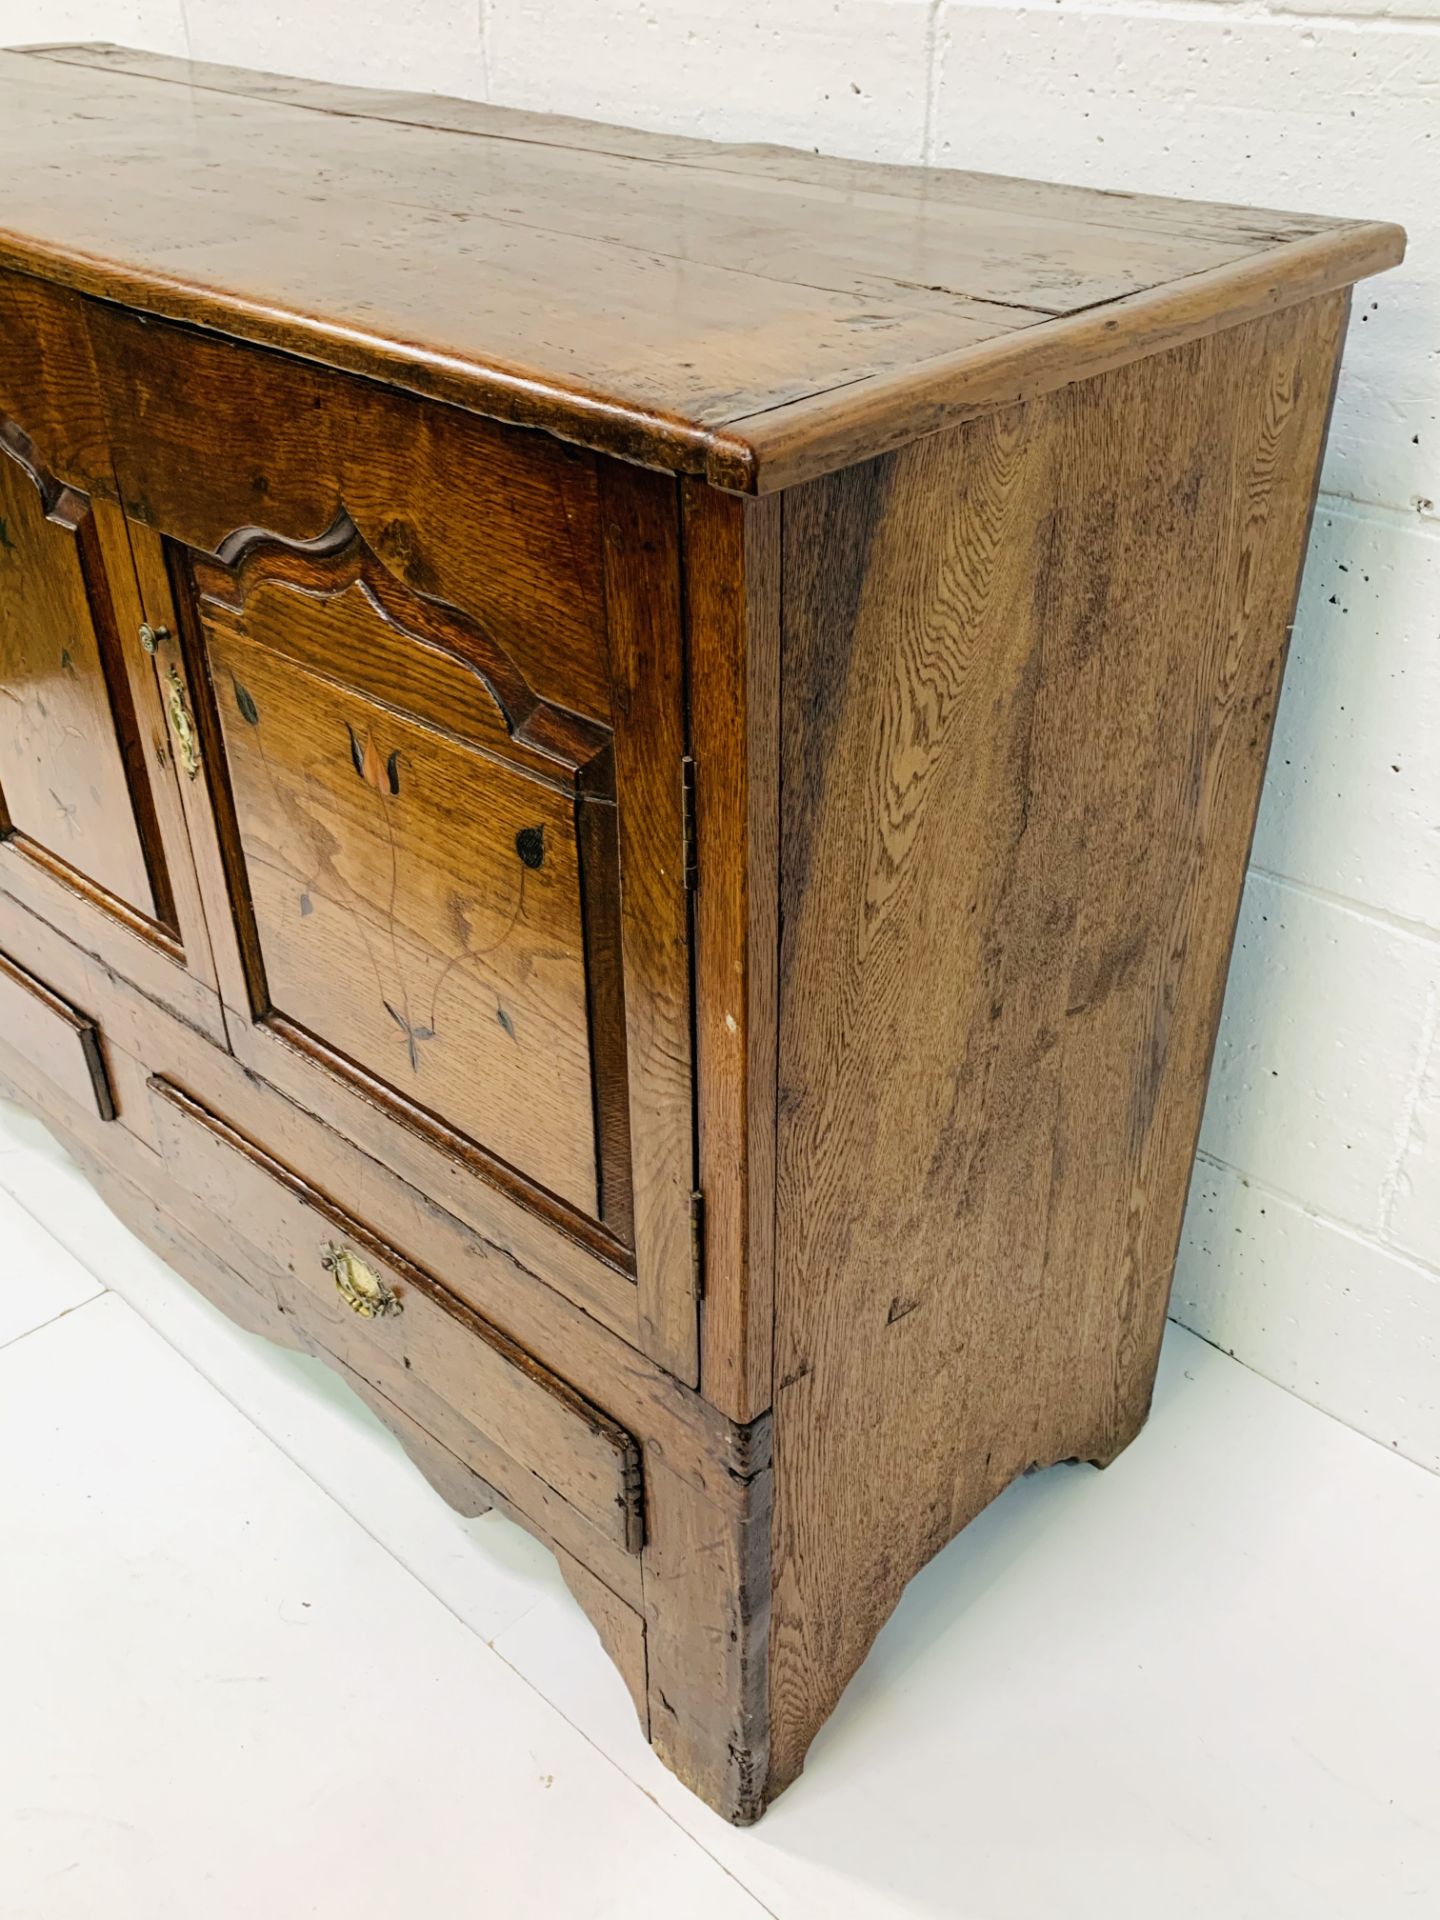 Oak sideboard with decorative inlaid door fronts and panel. - Image 8 of 8